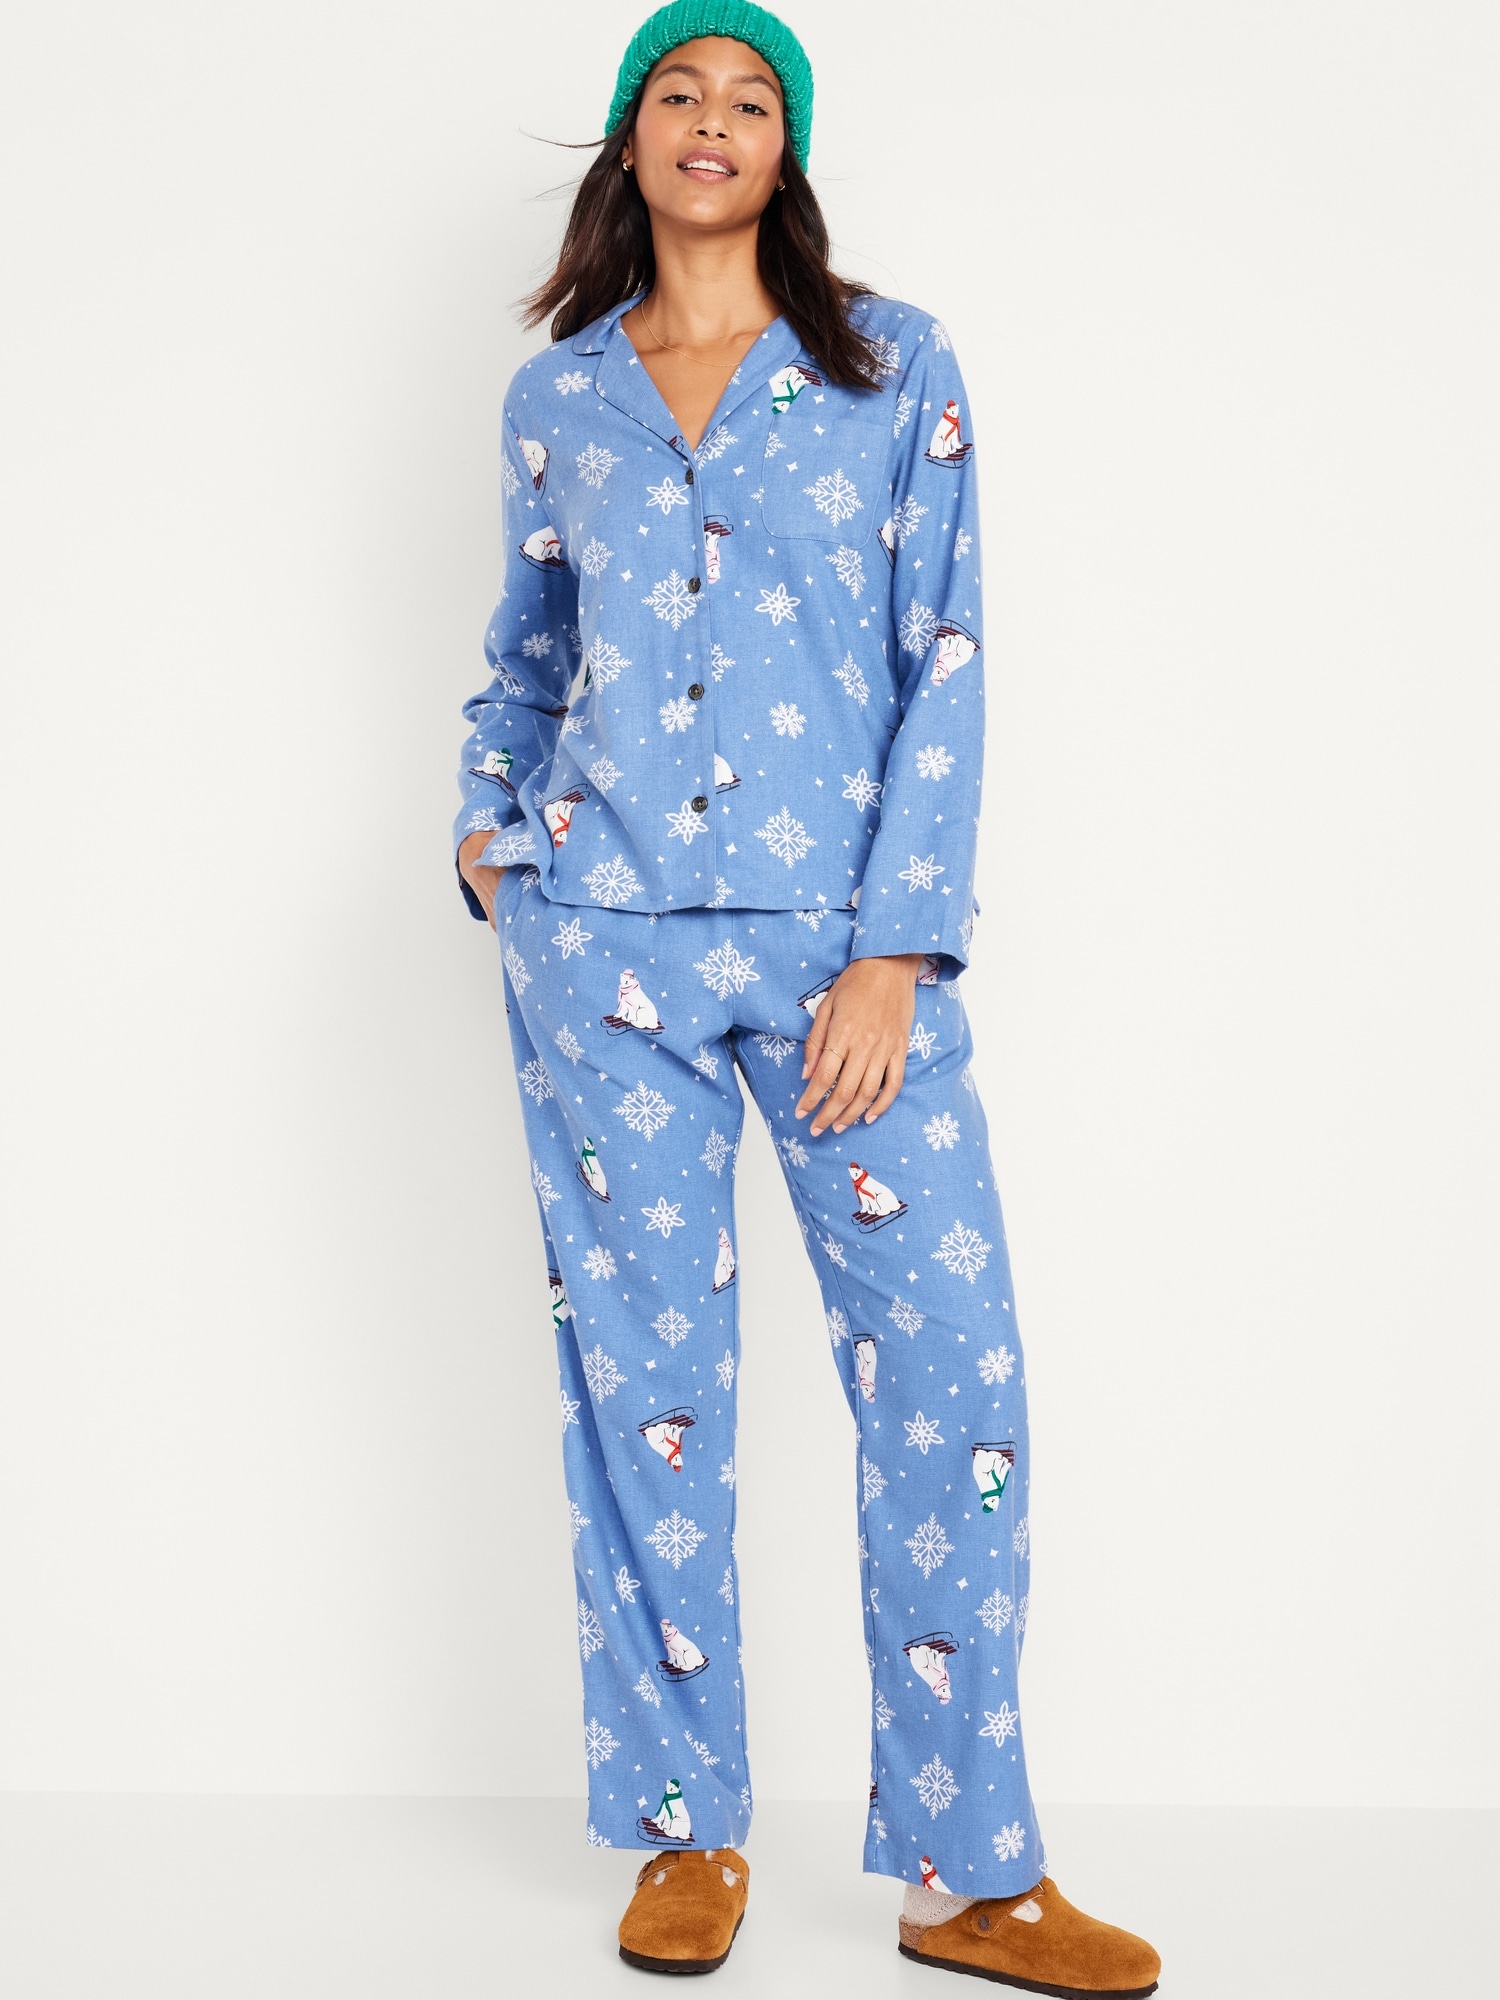 Matching Flannel Pajama Set for Women